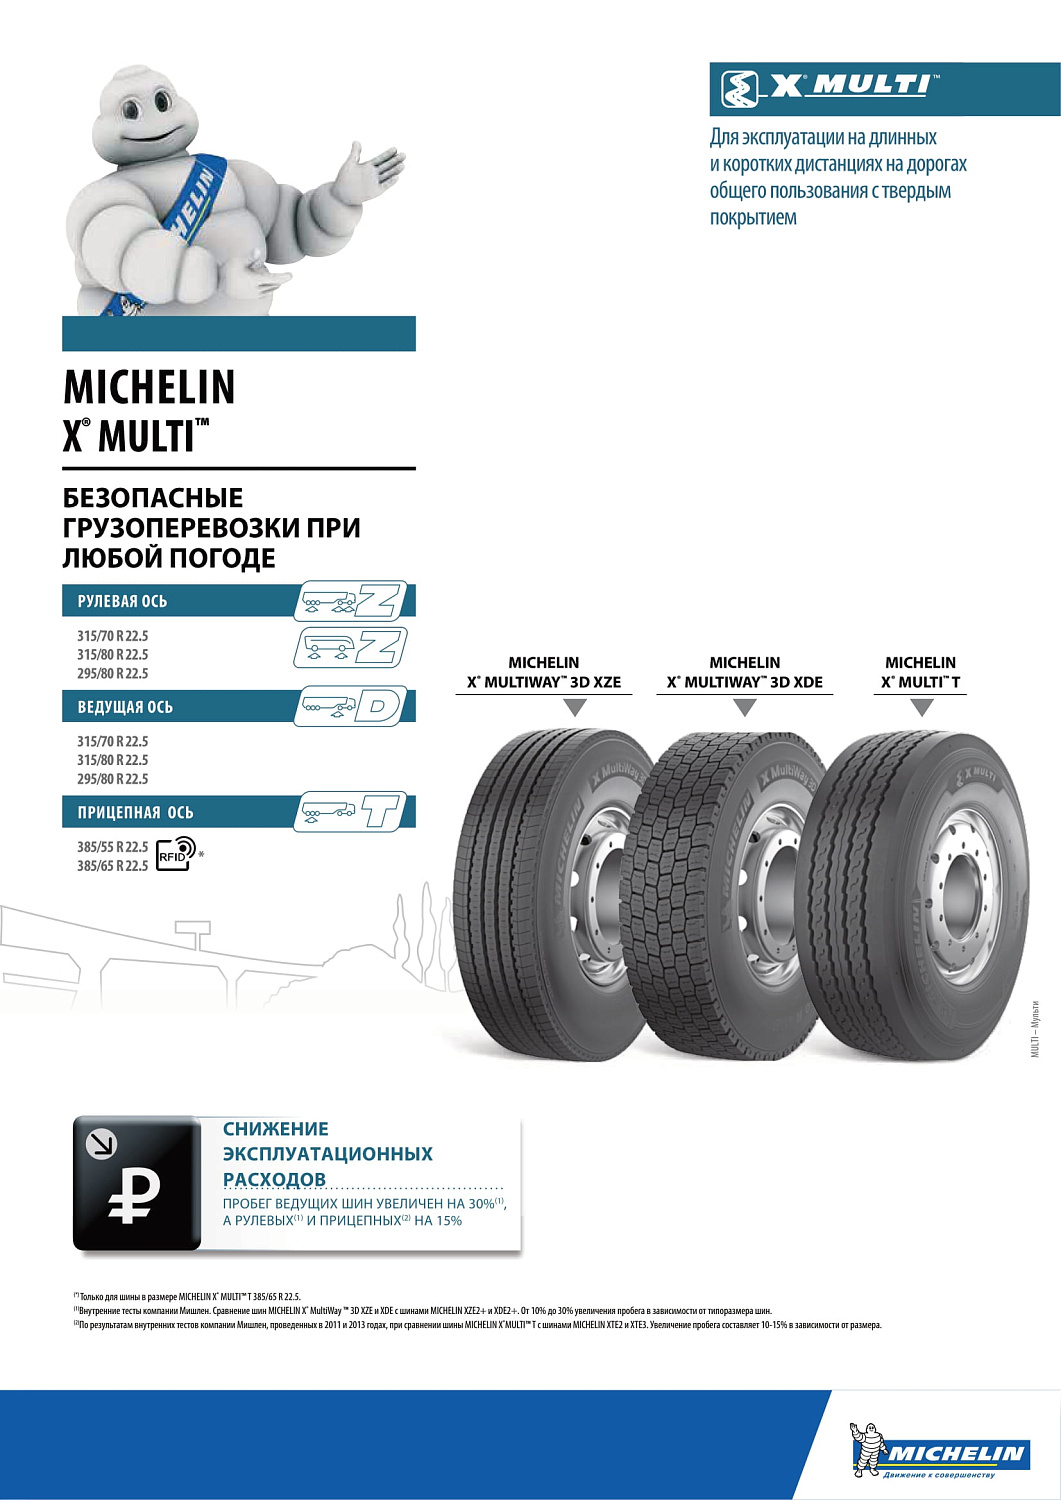 Michelin X MULTIWAY 3D XDE 315/70R22.5